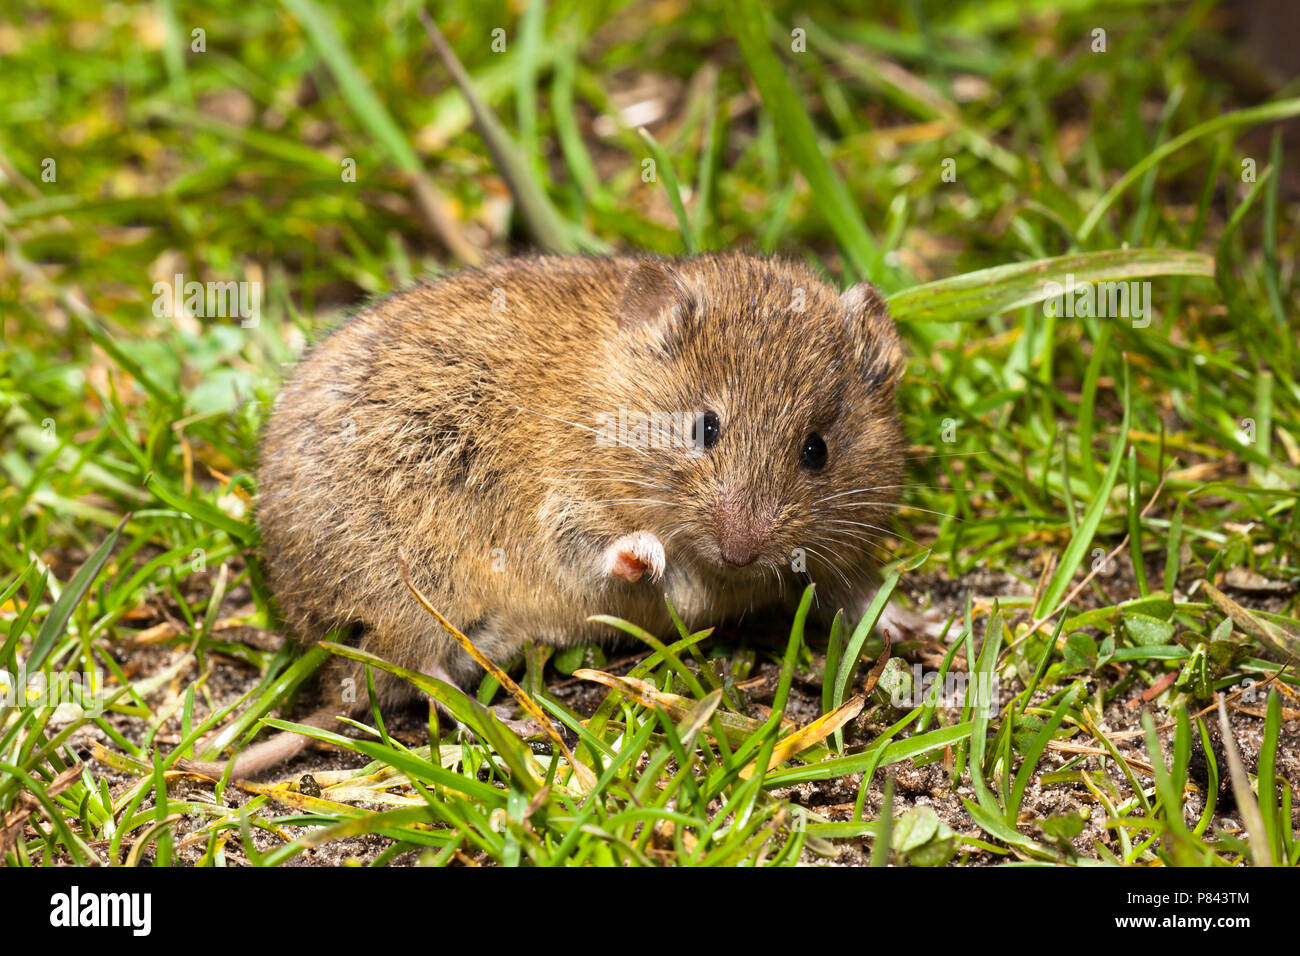 Foeragerende Veldmuis; Foraging Common Vole Stock Photo